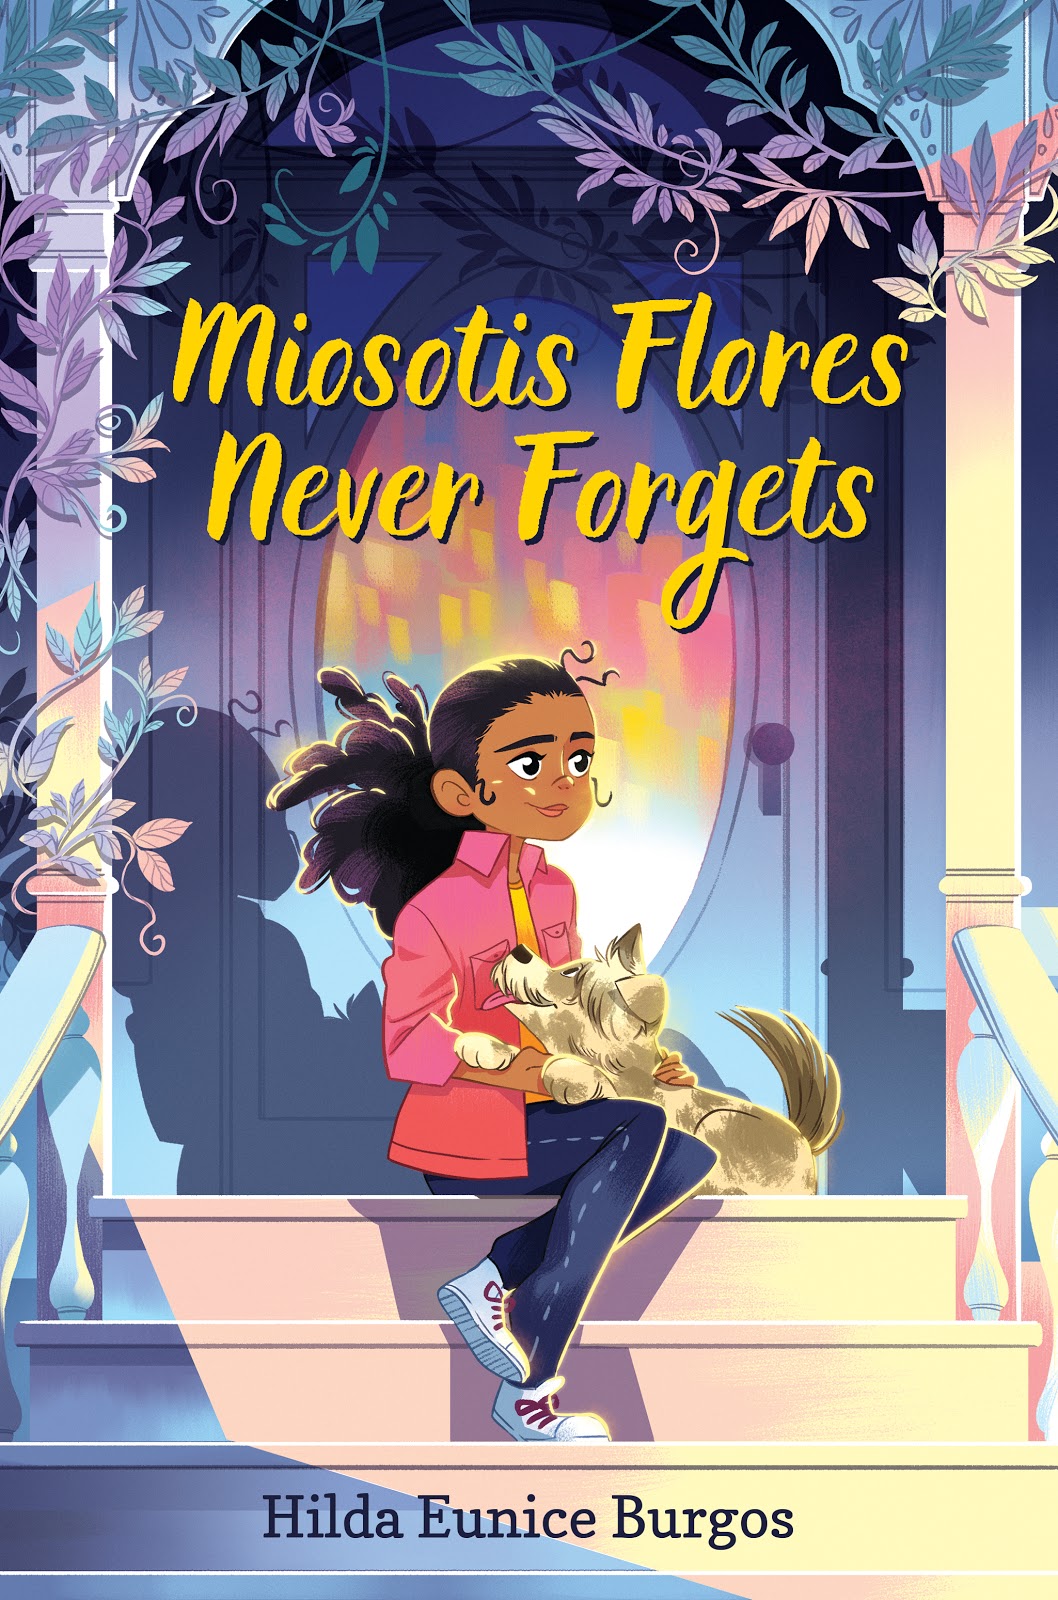 Cover of Cover Reveal of MIOSOTIS FLORES NEVER FORGETS, by Hilda Eunice Burgos, featuring a young girl sitting on steps with her dog on her lap.